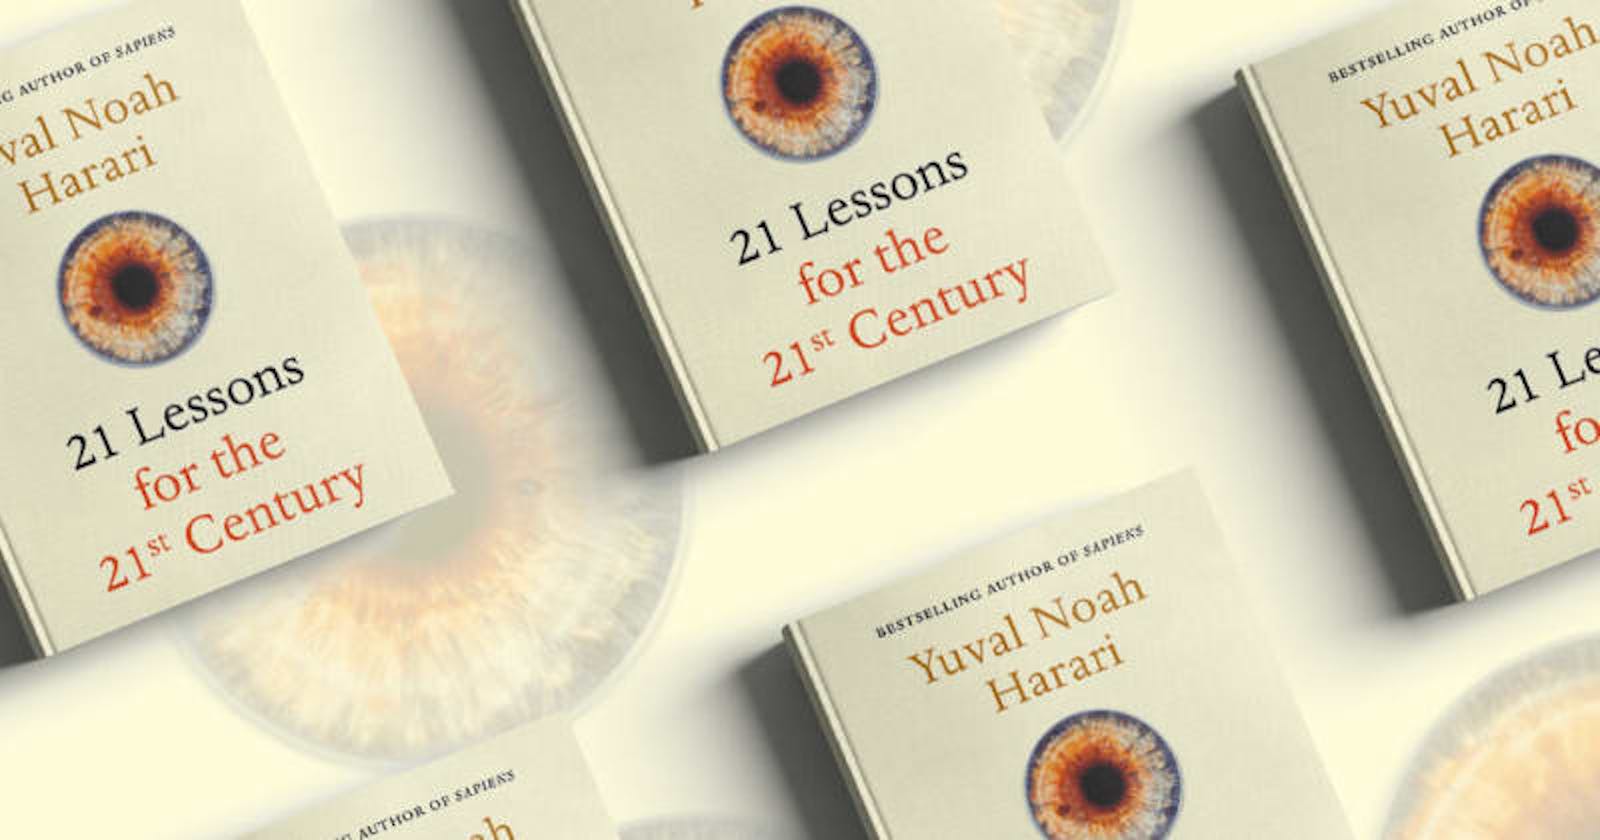 21 Lessons for the 21st Century
by Yuval Noah Harari